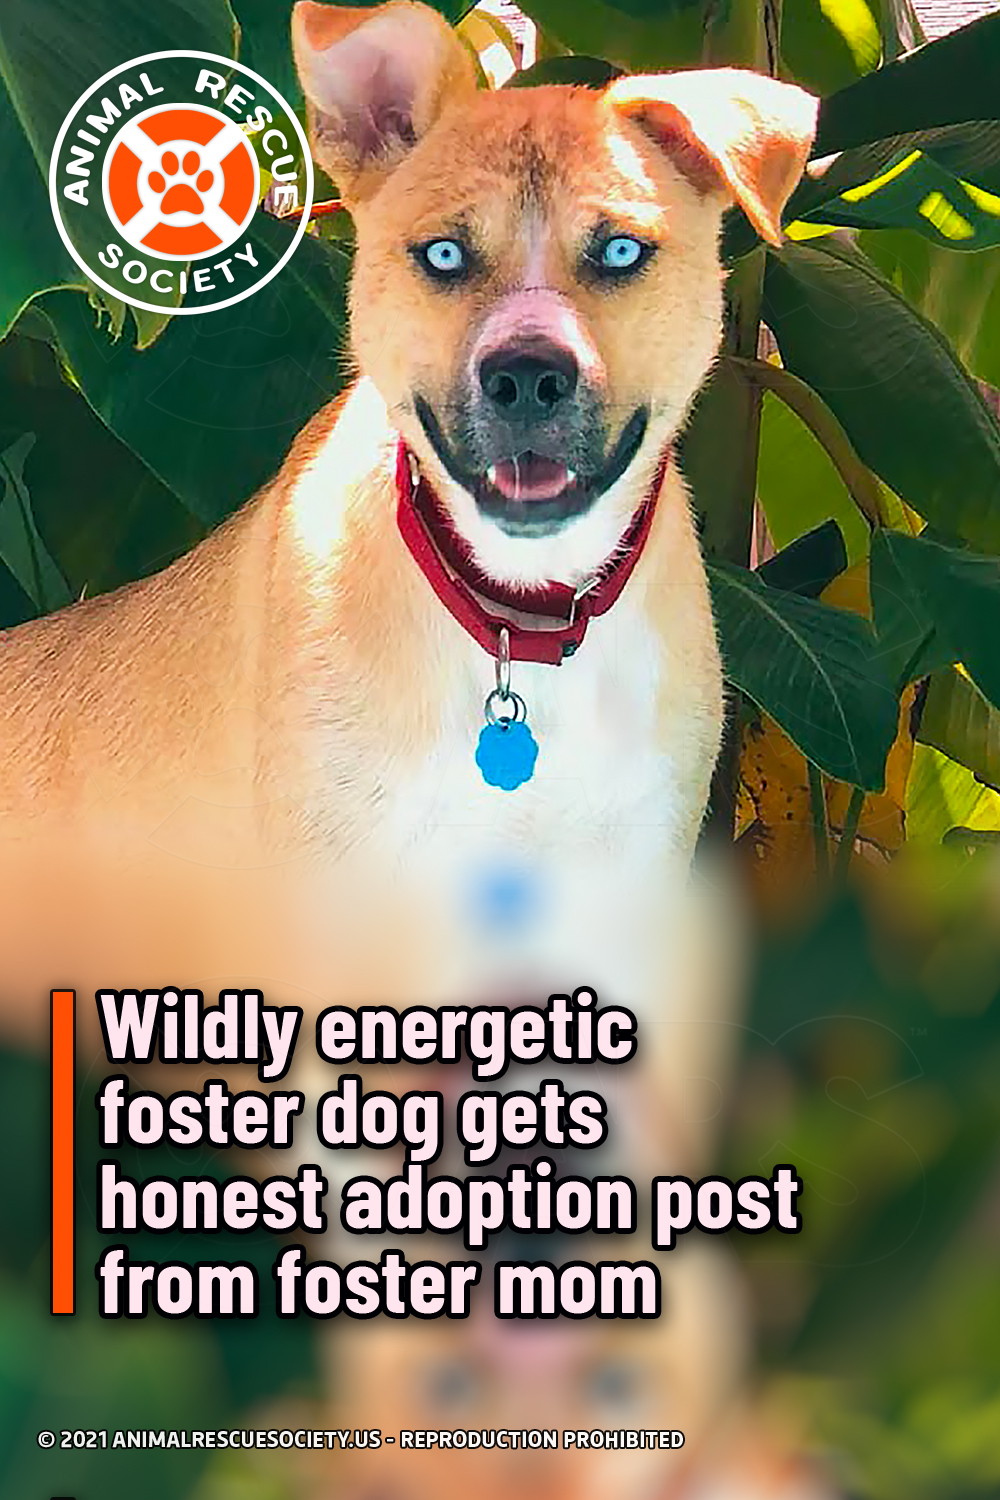 Wildly energetic foster dog gets honest adoption post from foster mom